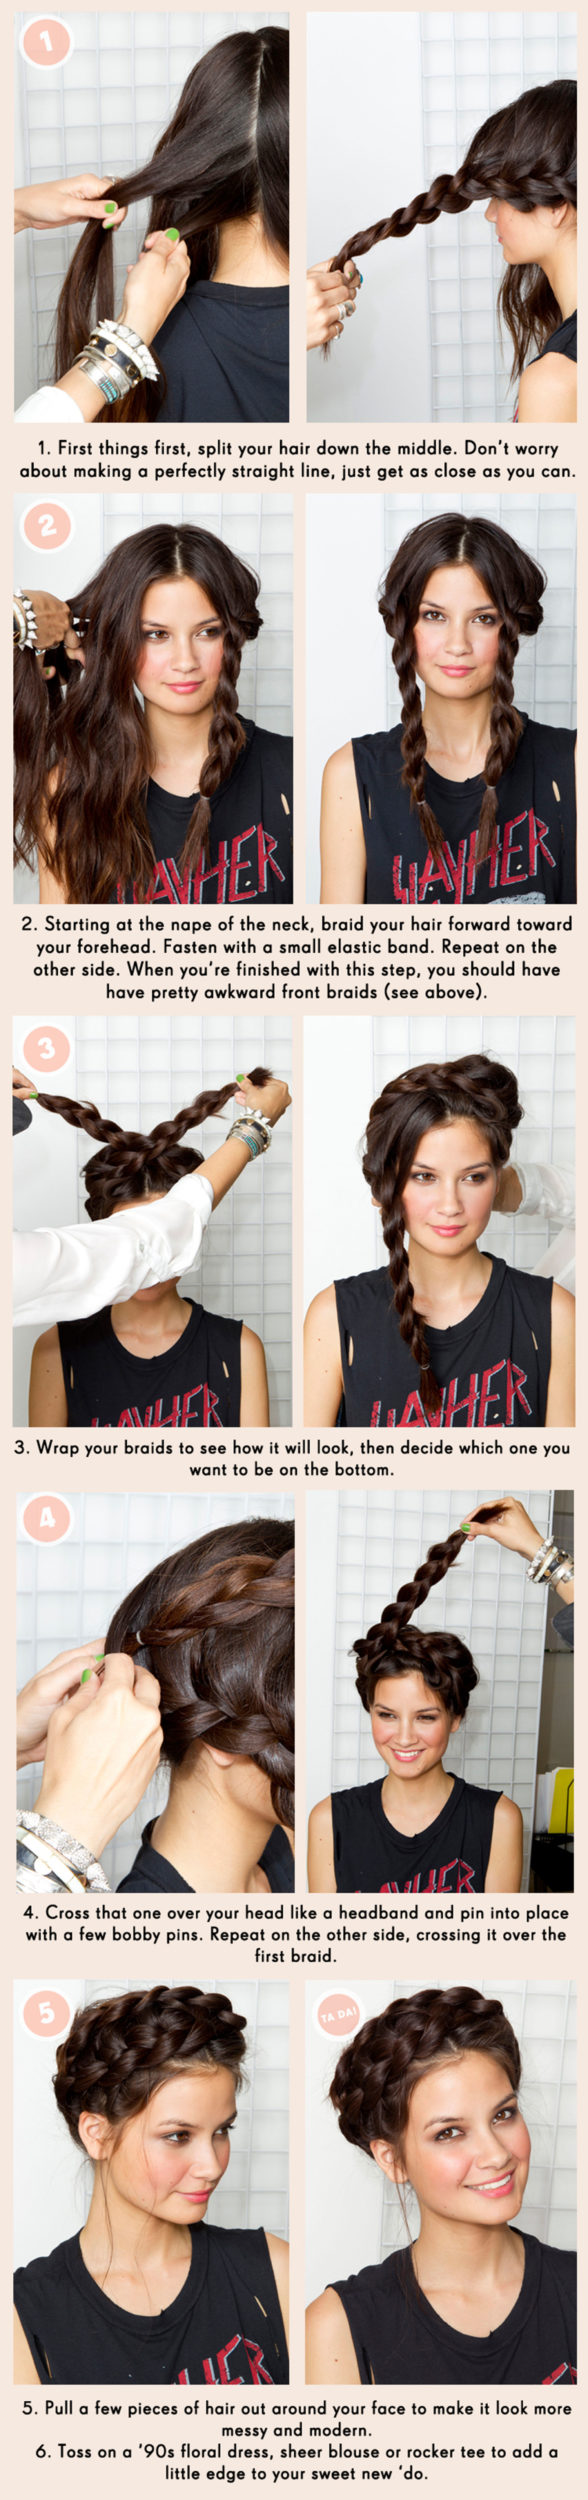 The Best Crown Braids DIY Tutorials For Princess Look Anywhere